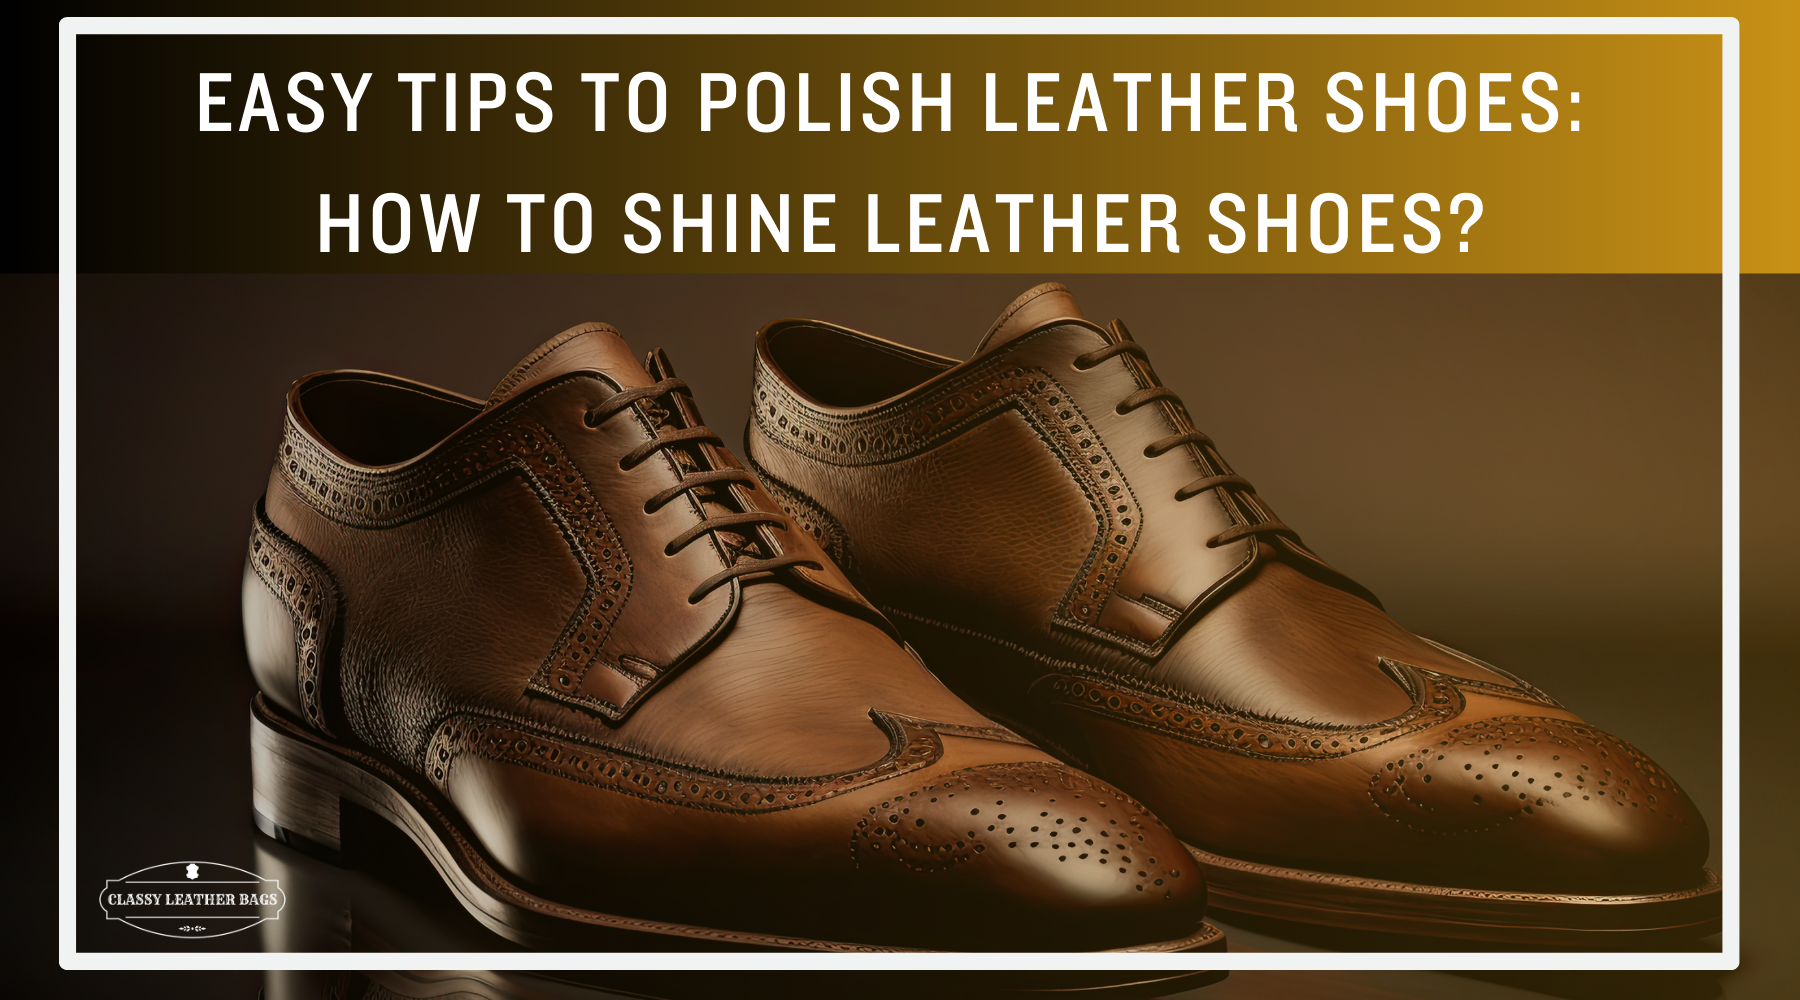 Easy Tips to Polish Leather Shoes: How to Shine Leather Shoes?